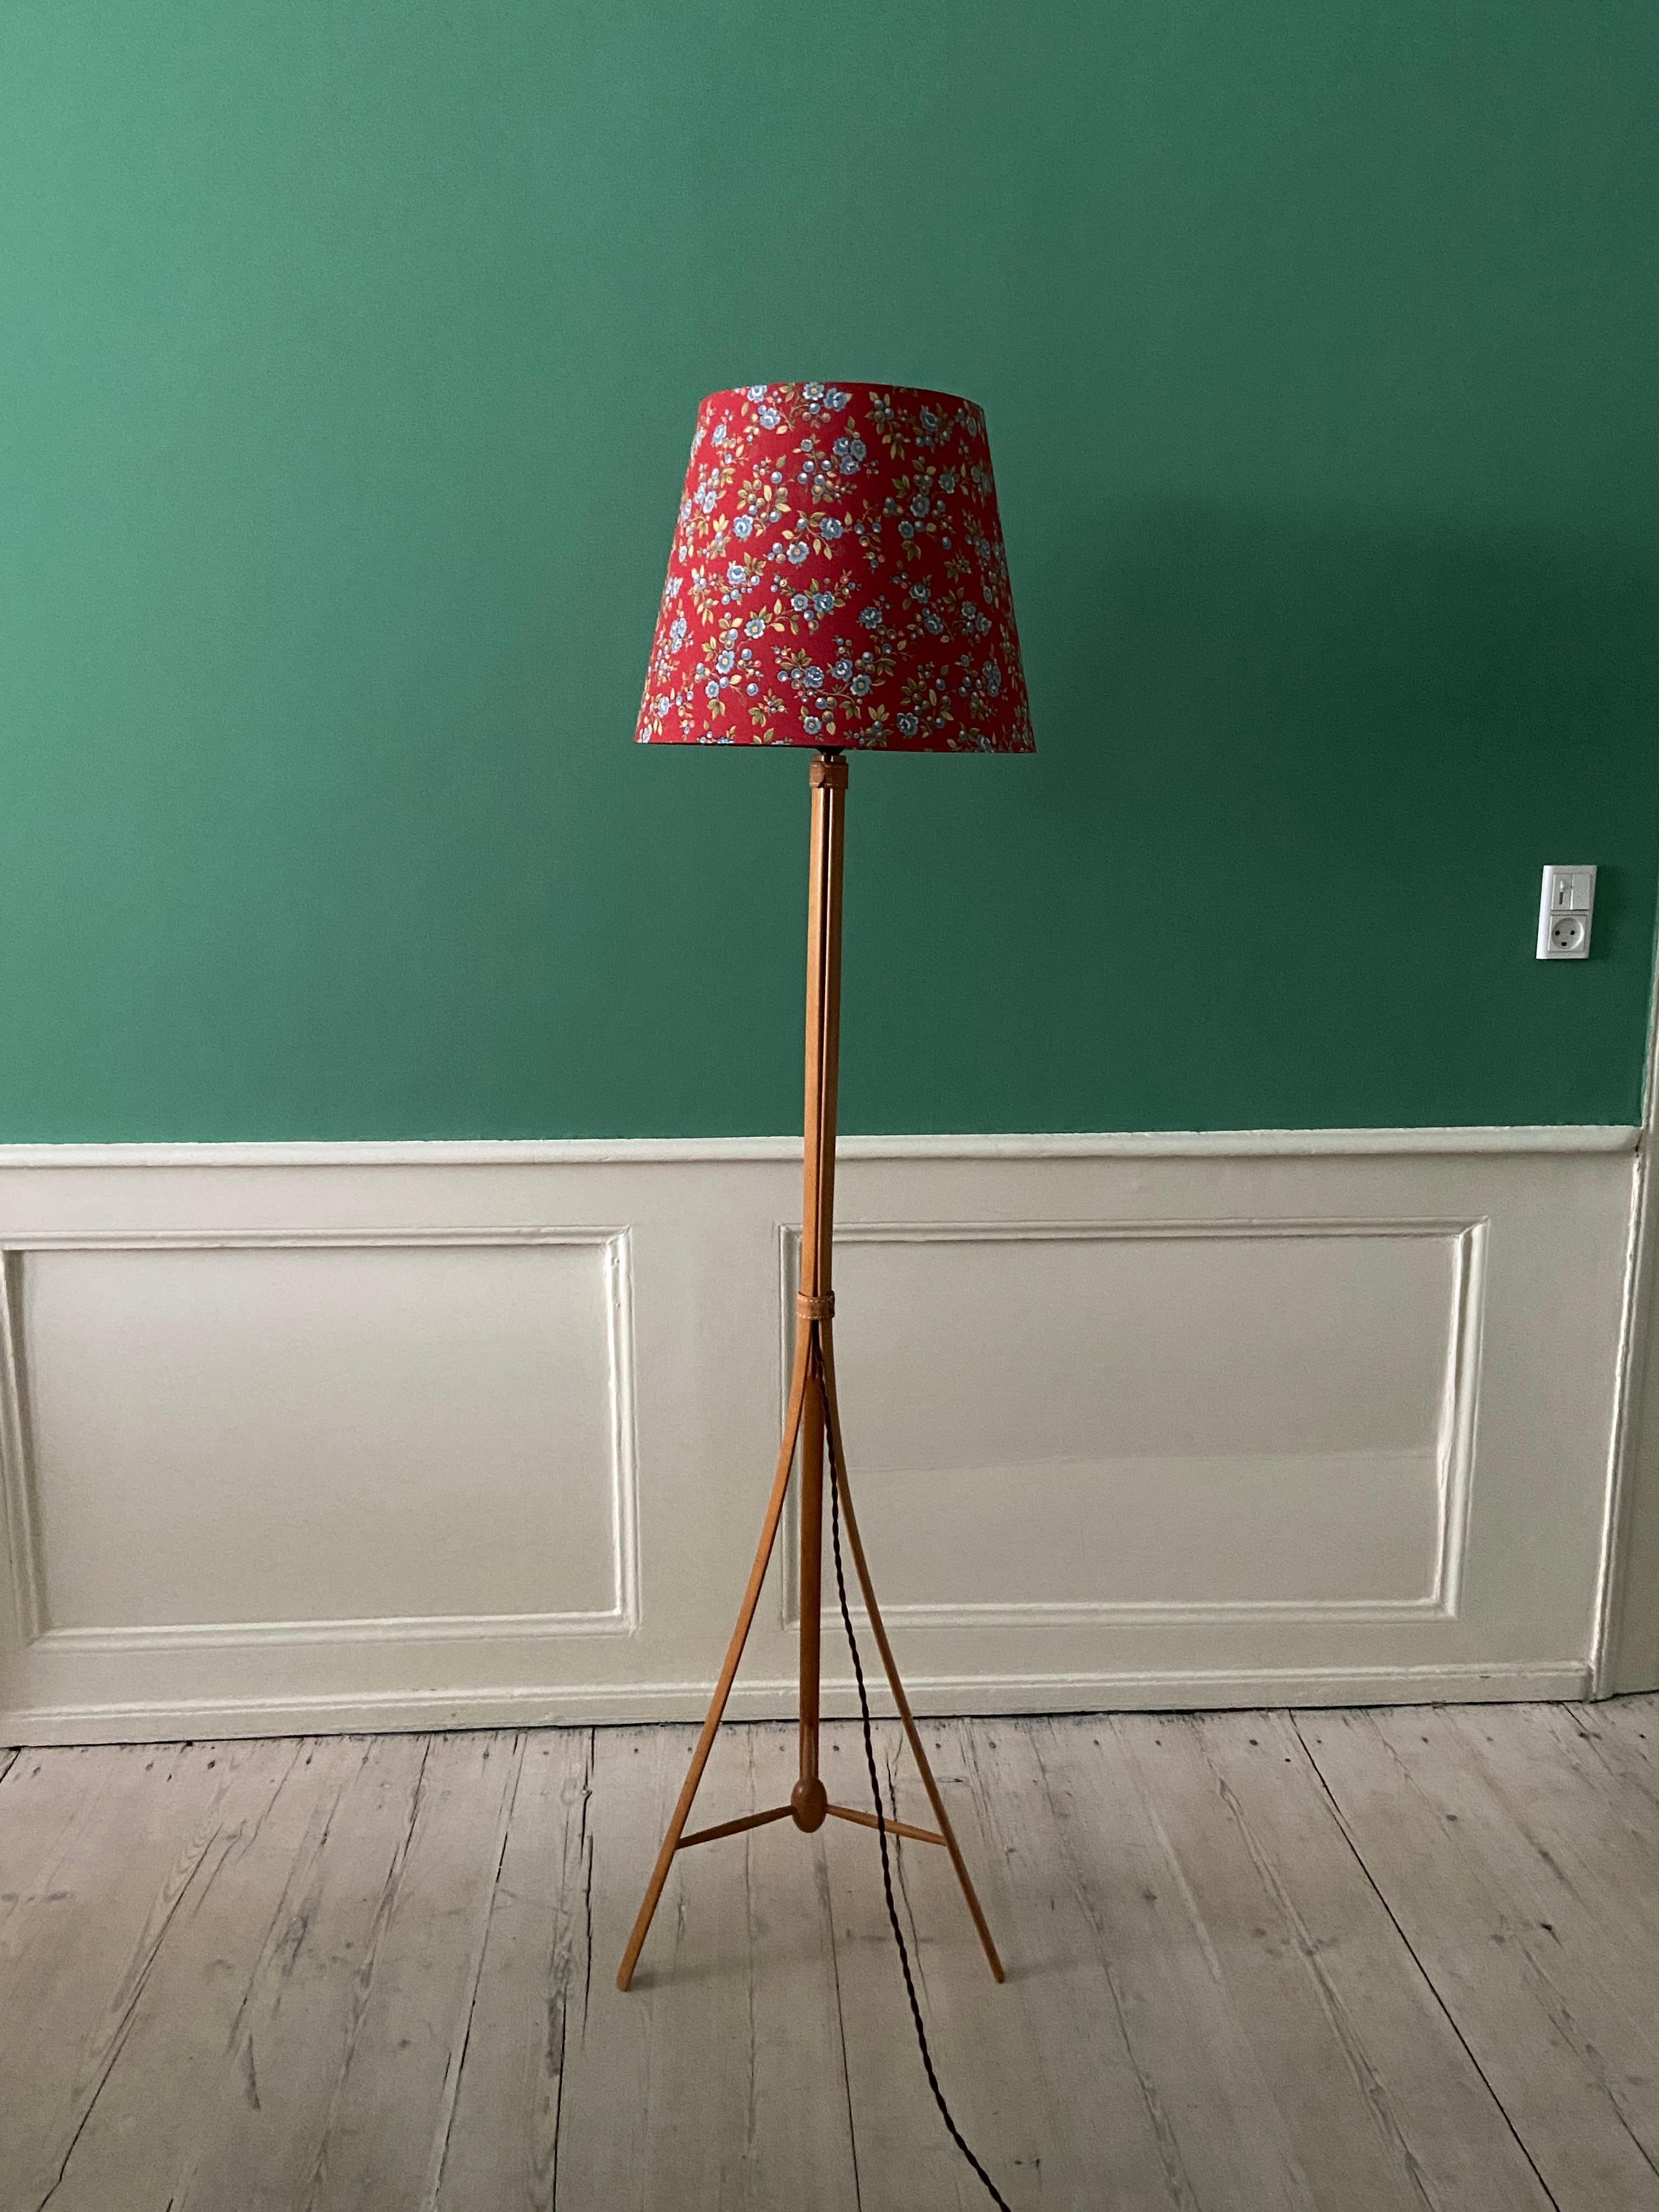 Vintage Alf Svensson Floor Lamp in Birch with Customized Shade, Sweden, 1950s For Sale 1